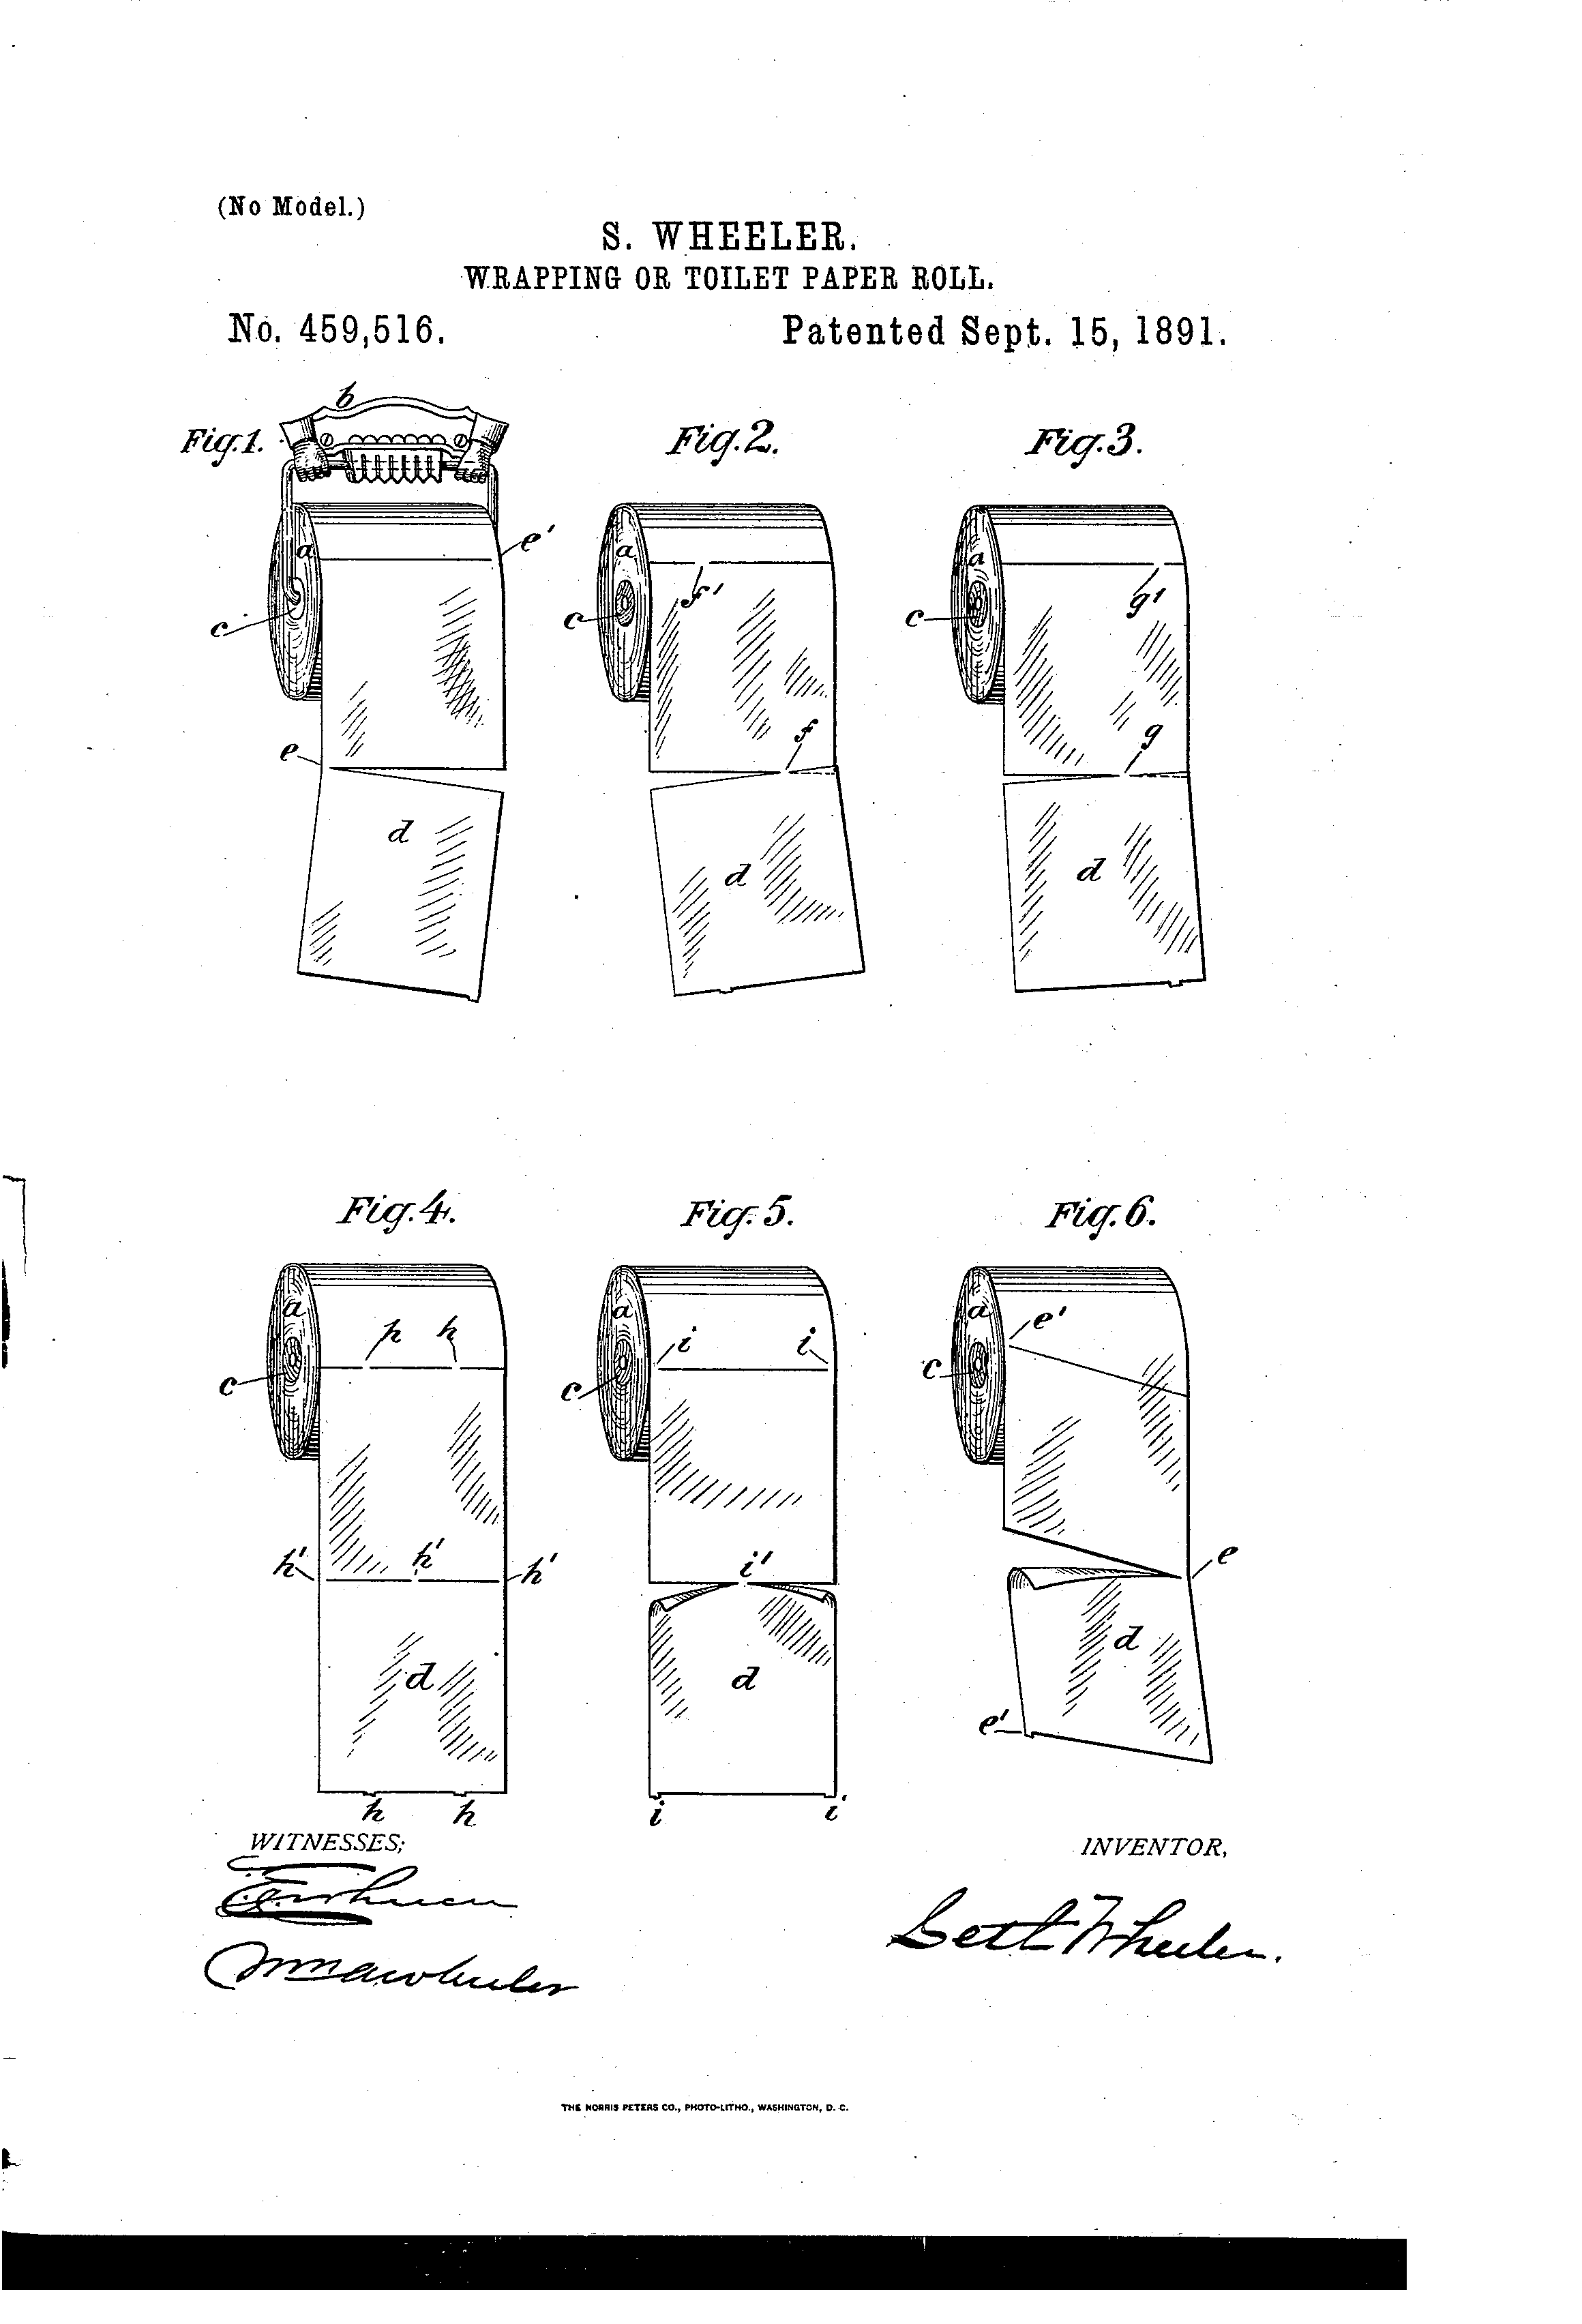 How to install a toilet paper roll, from U.S. Patent US 459,516 A by Seth Wheeler, 1891.